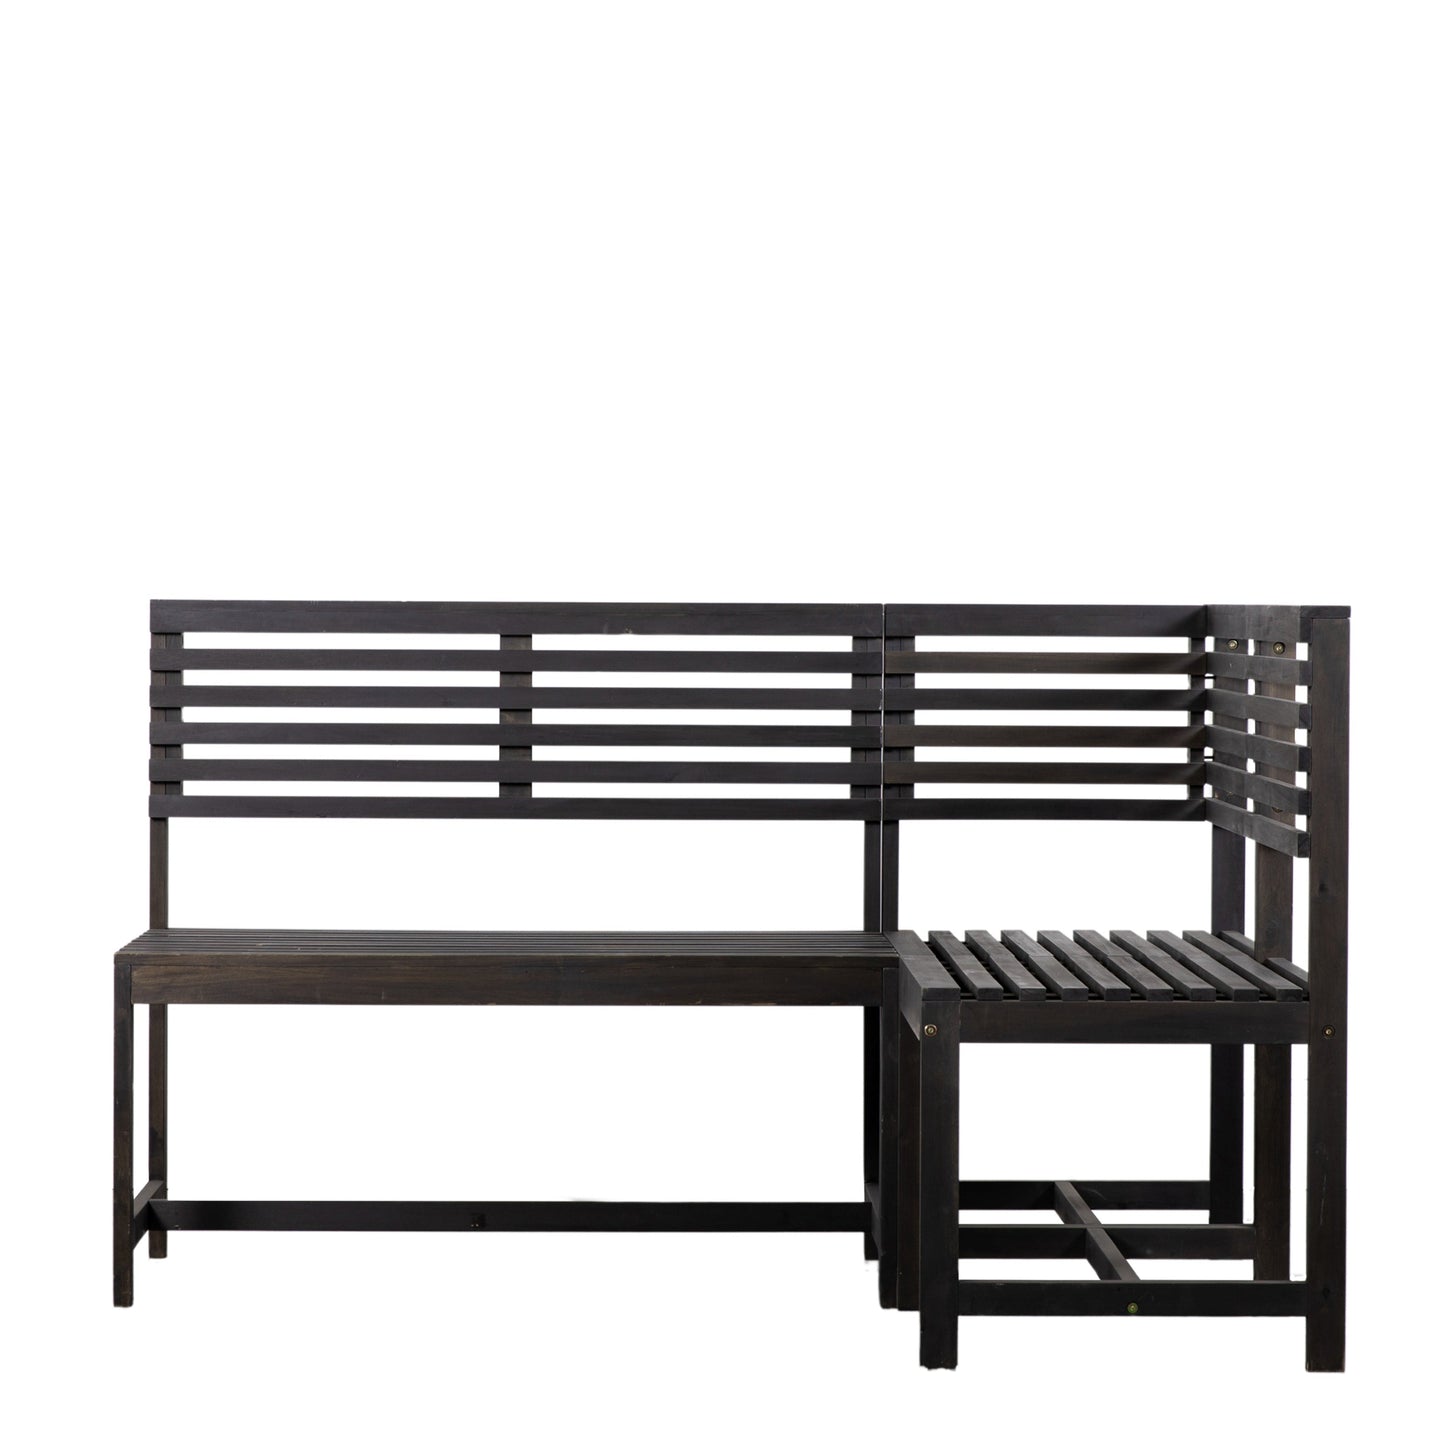 A modular bench with slats, perfect for interior decor and home furniture, available on Kikiathome.co.uk.